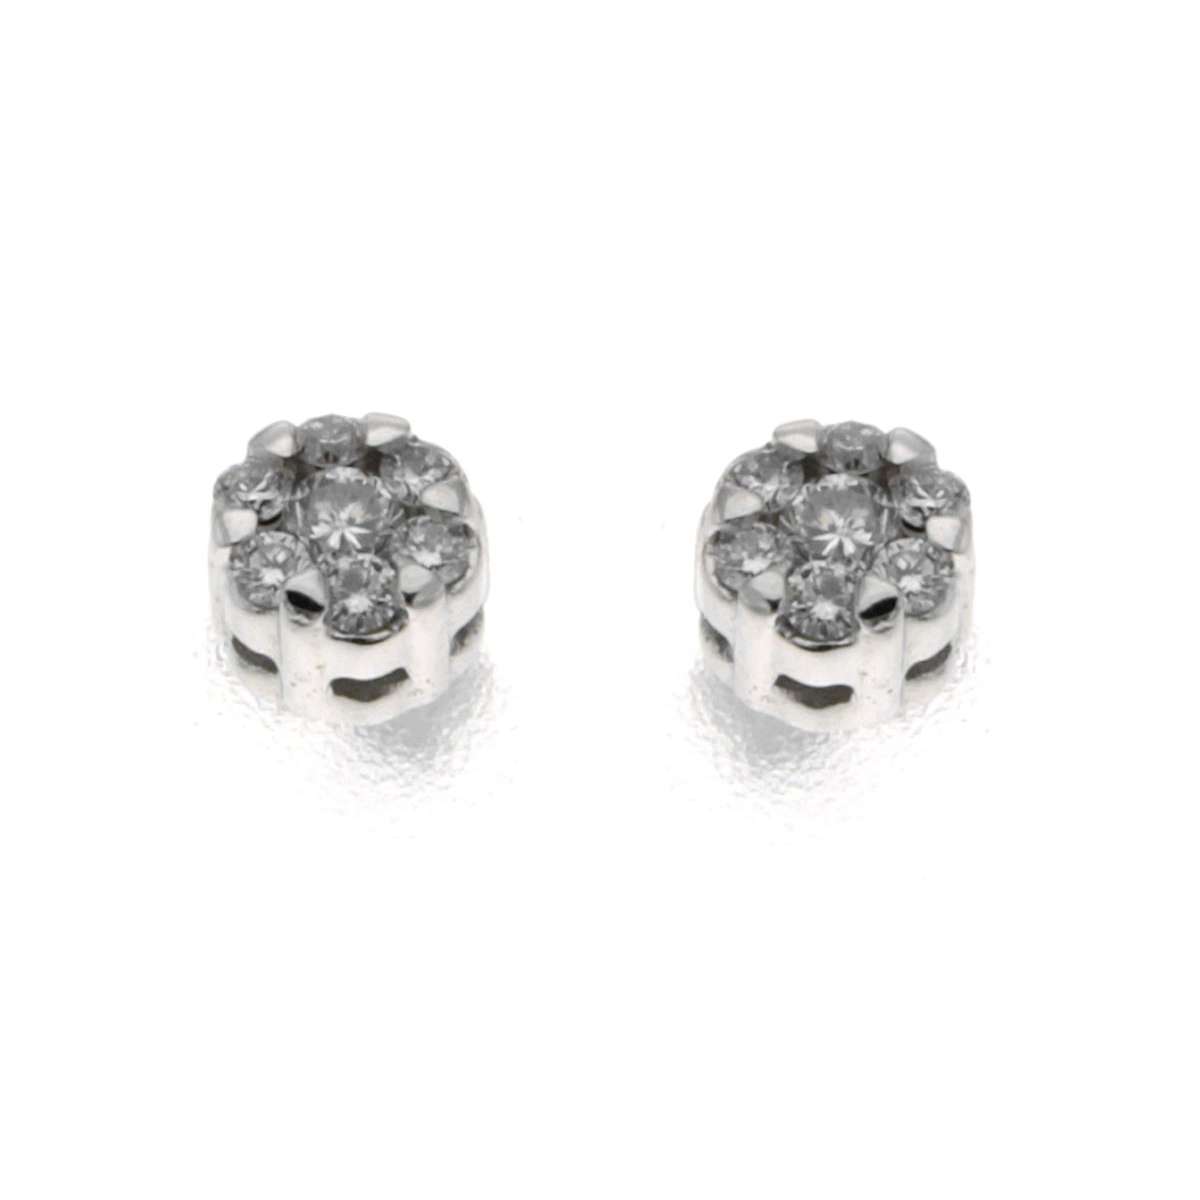 Fancy solitaire concealed embedded stud earrings 0.30 carats diamonds G-VS1